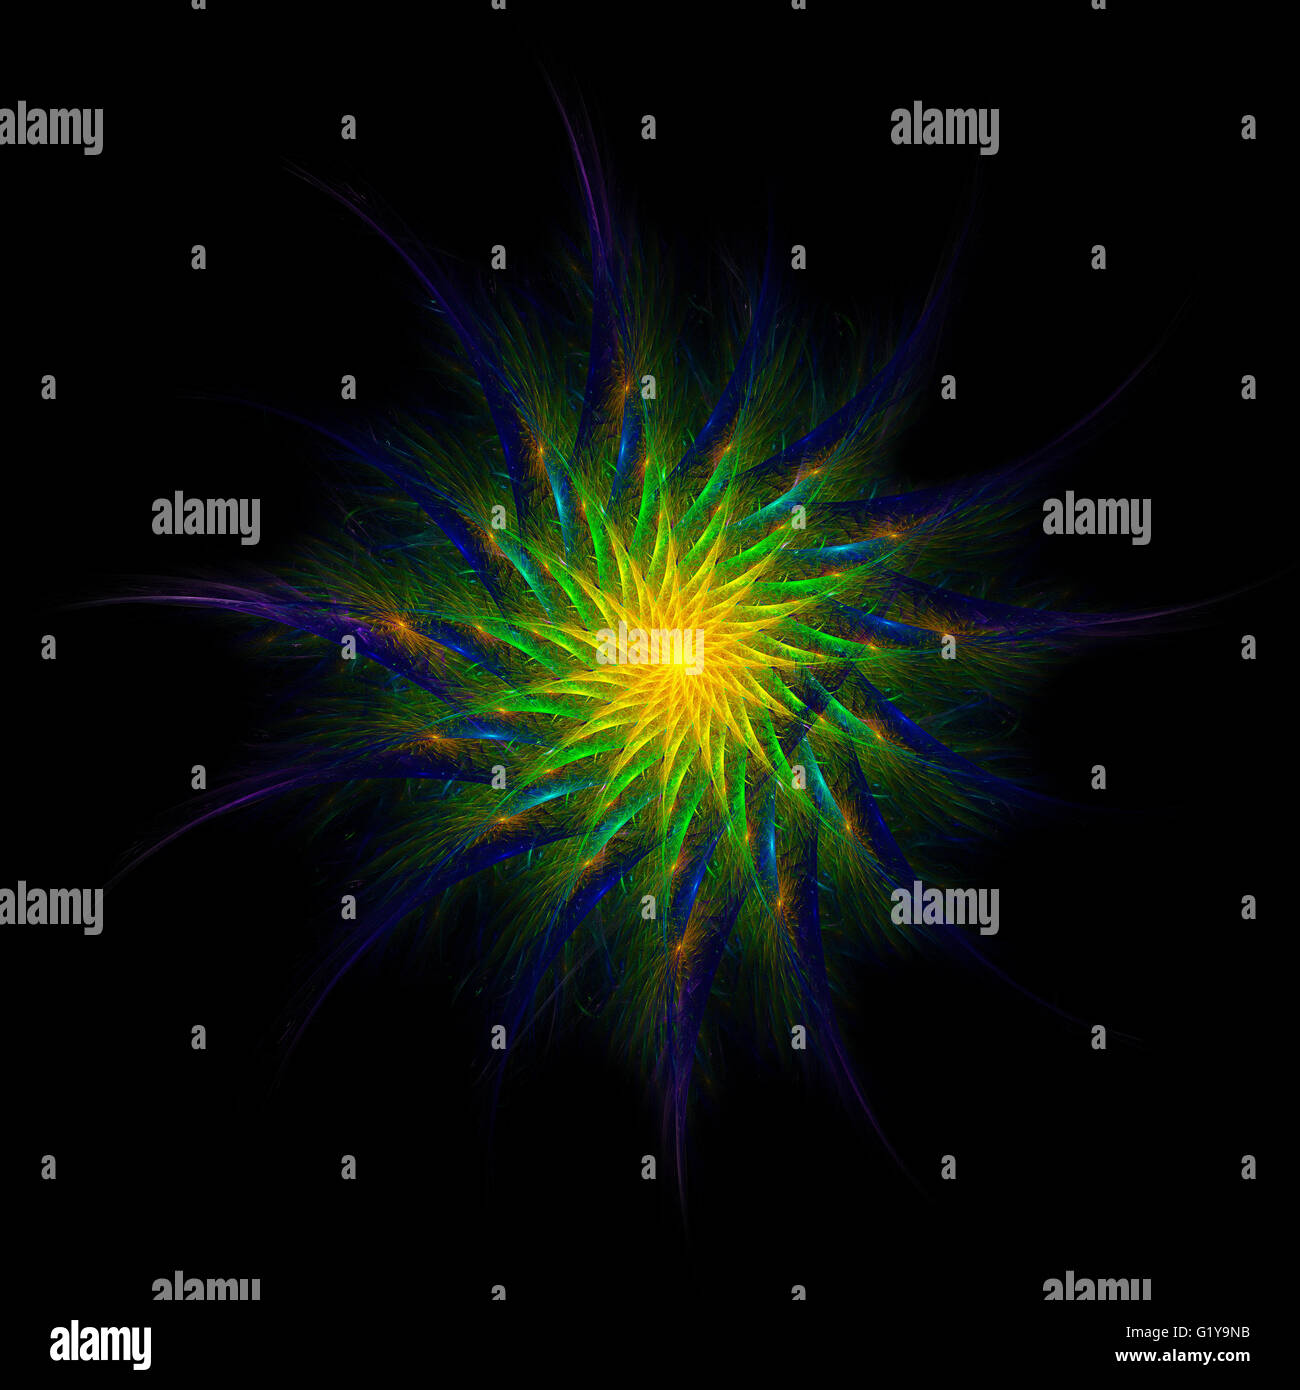 Fractal star glowing in yellow, green and electric blue on black background Stock Photo